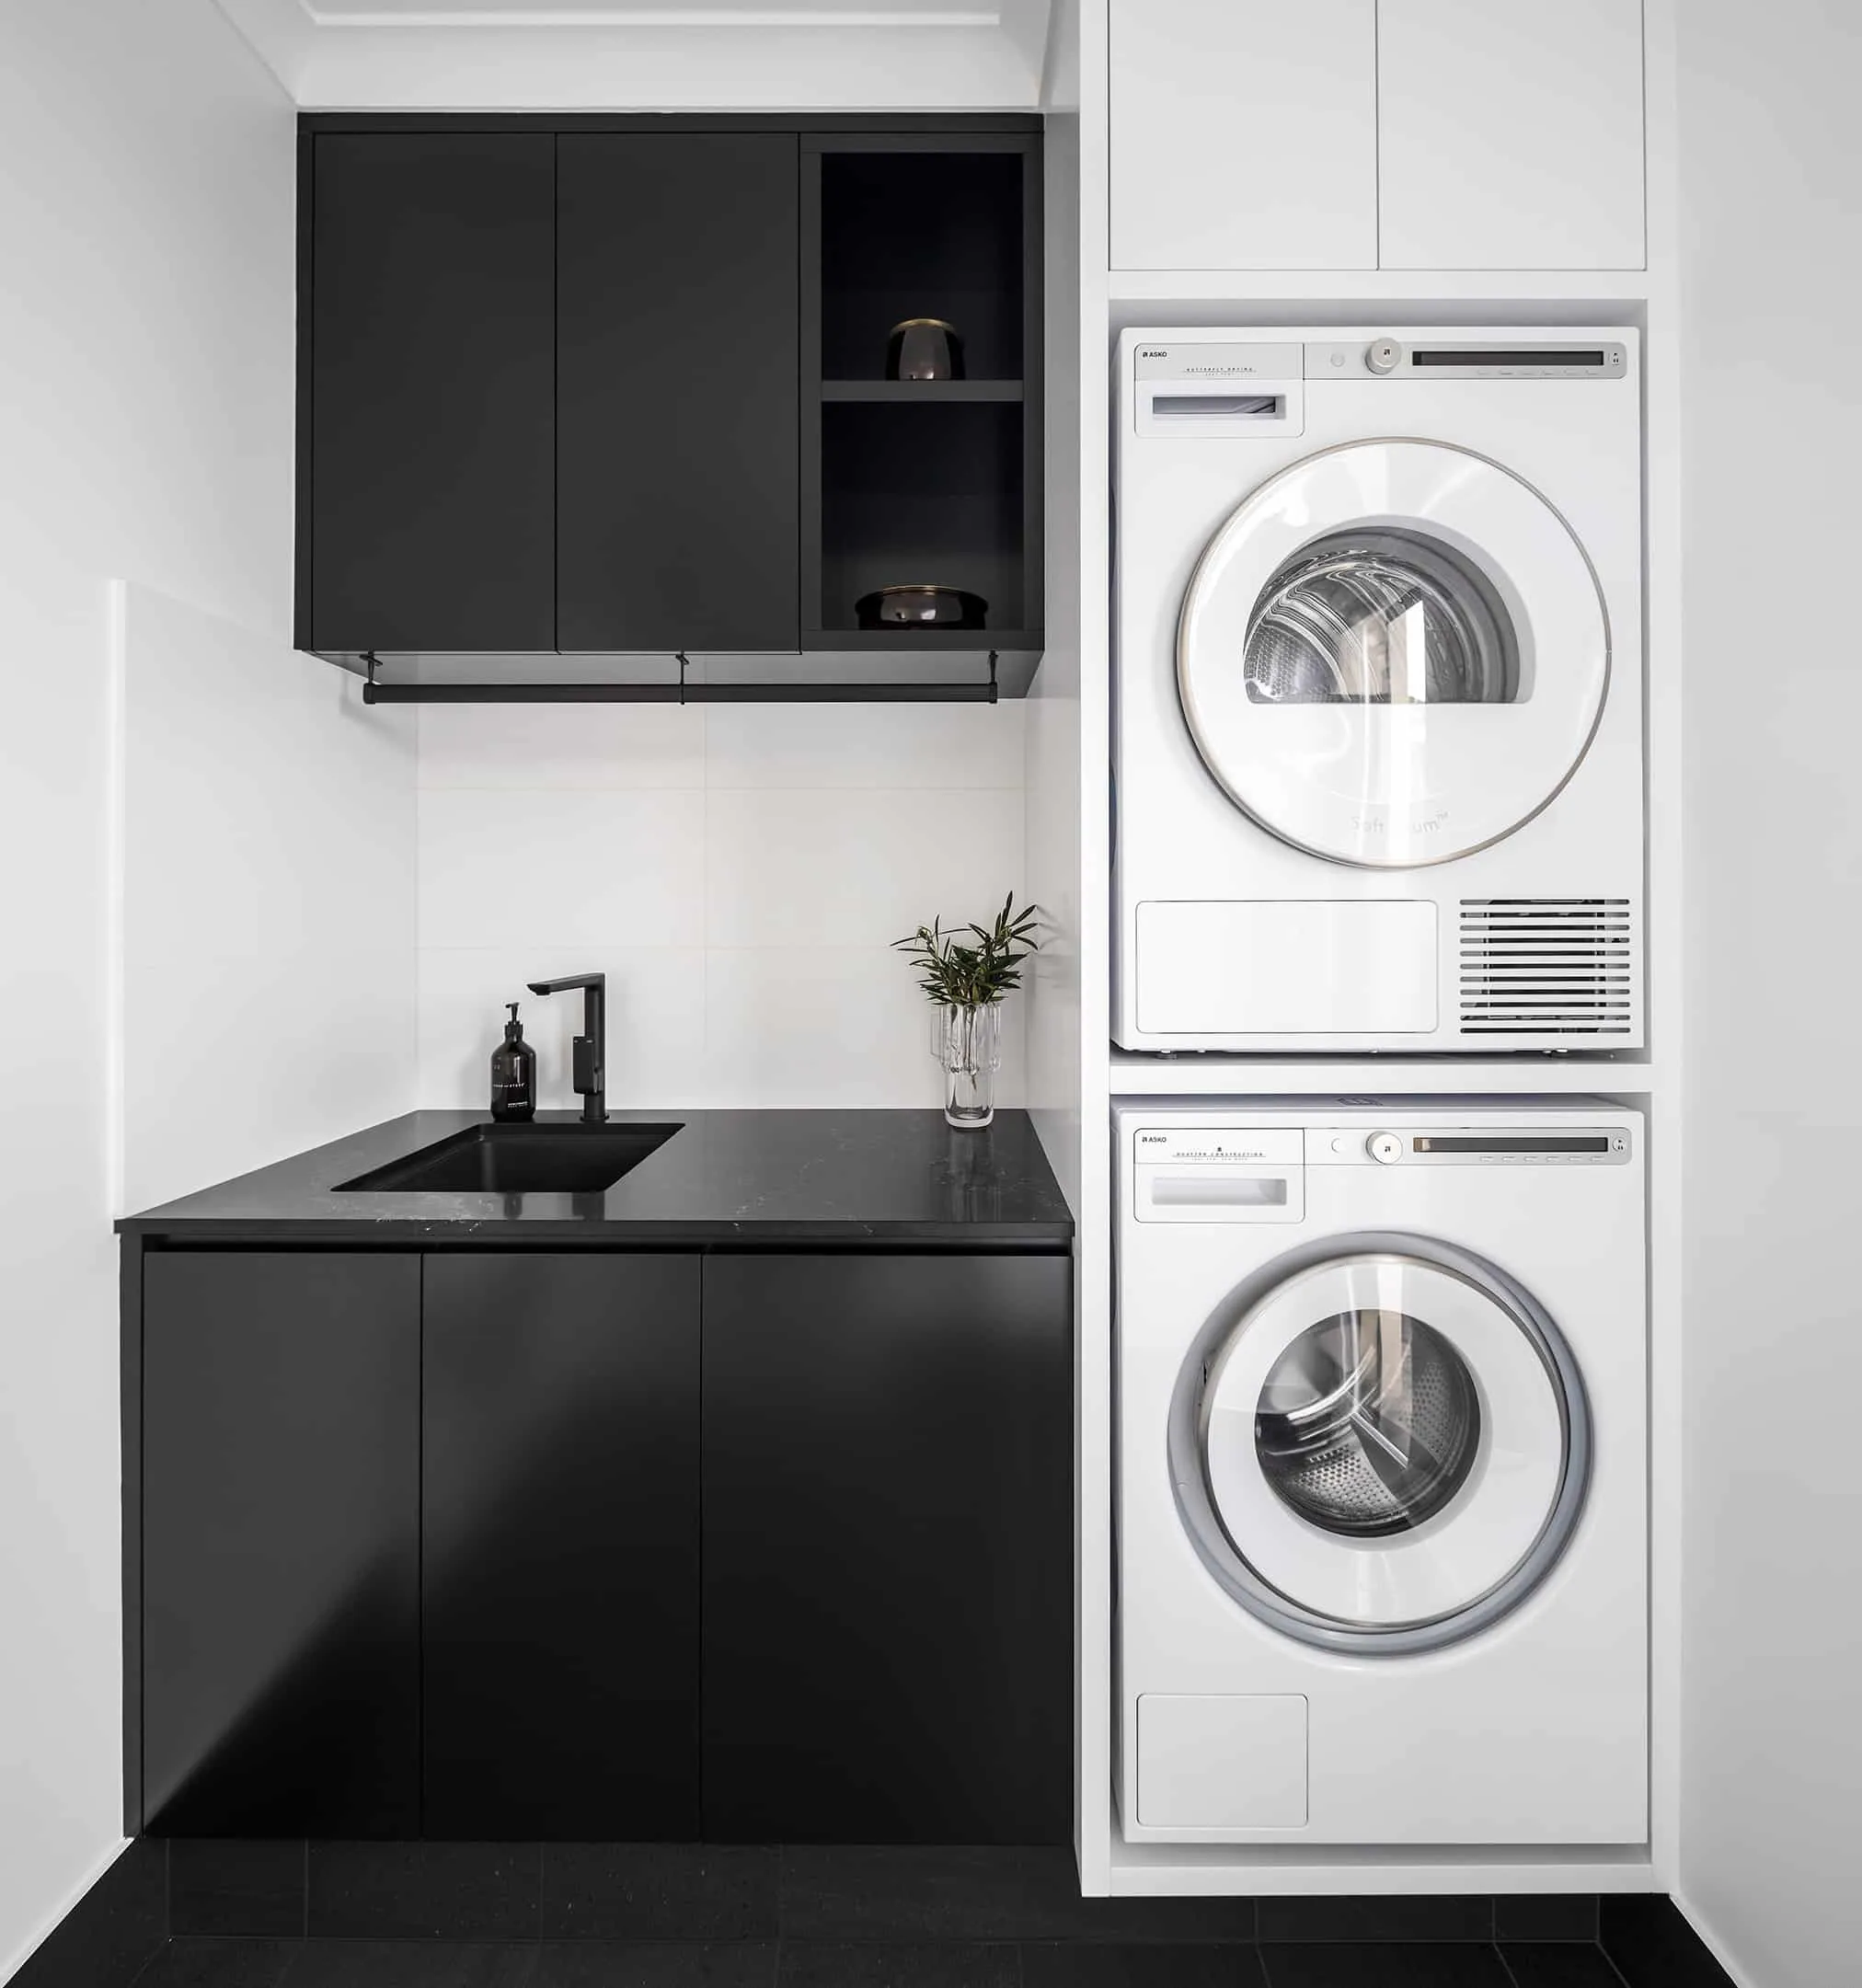 A photo of a laundry, with sink, washing machine and dryer.